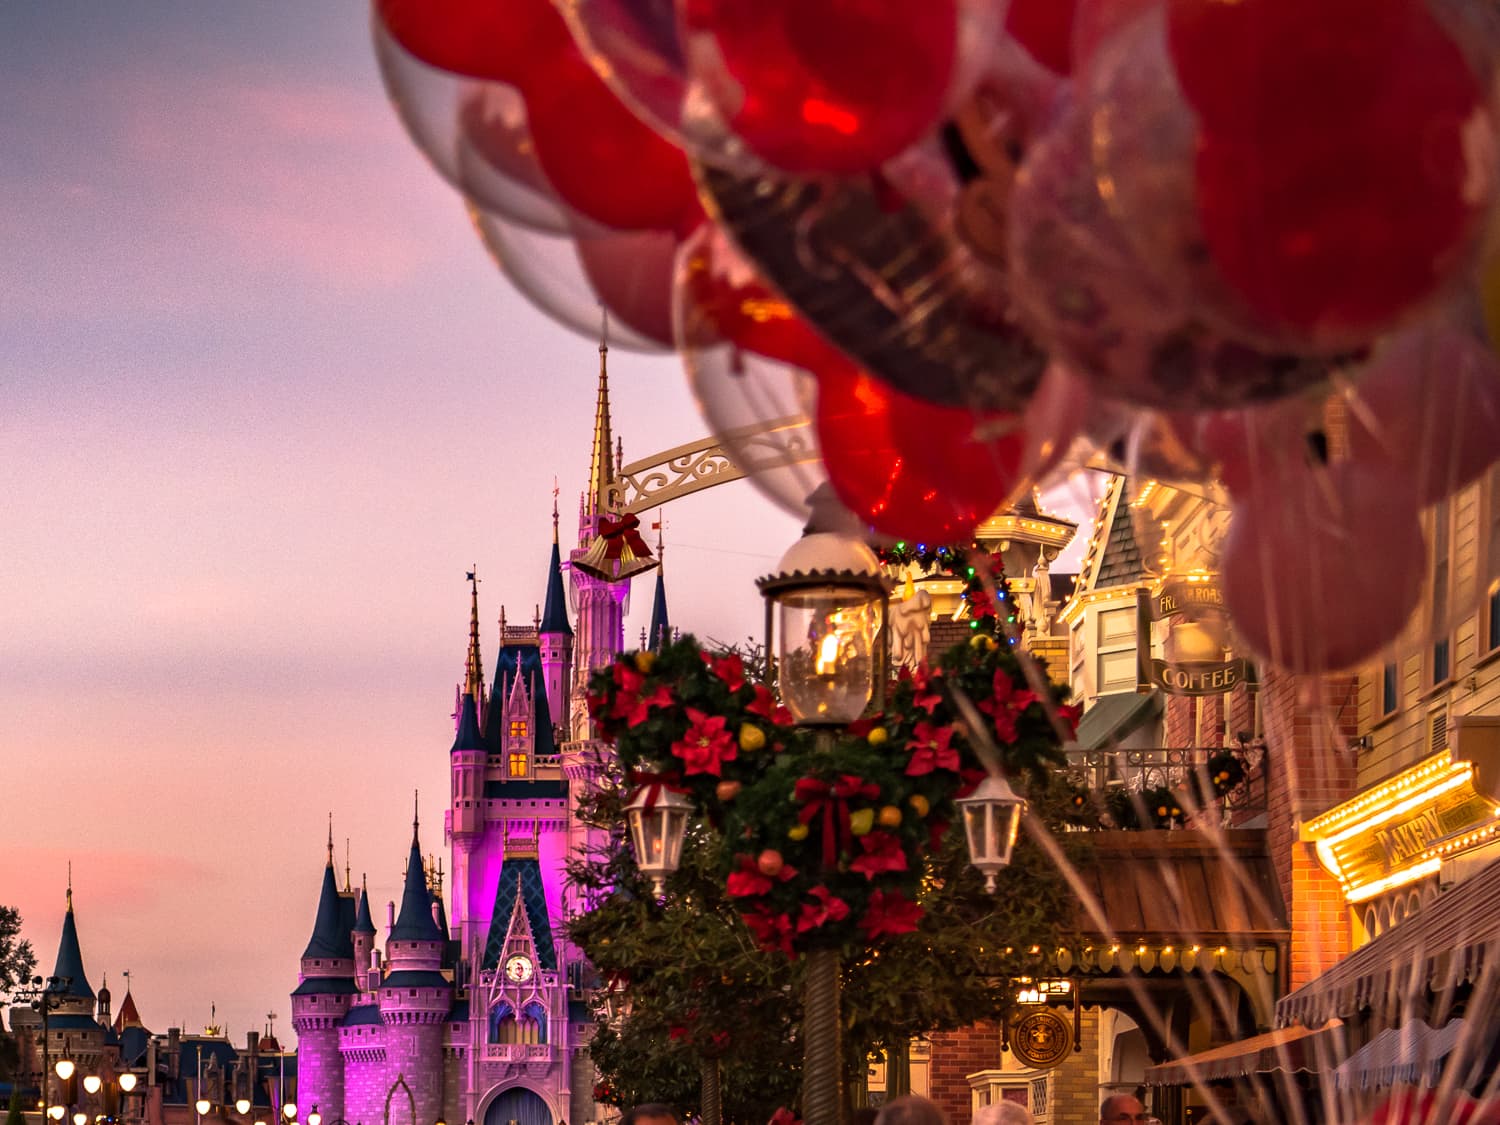 Ballons and Christmas decorations in front of the cinderella castle at magic kingdom.